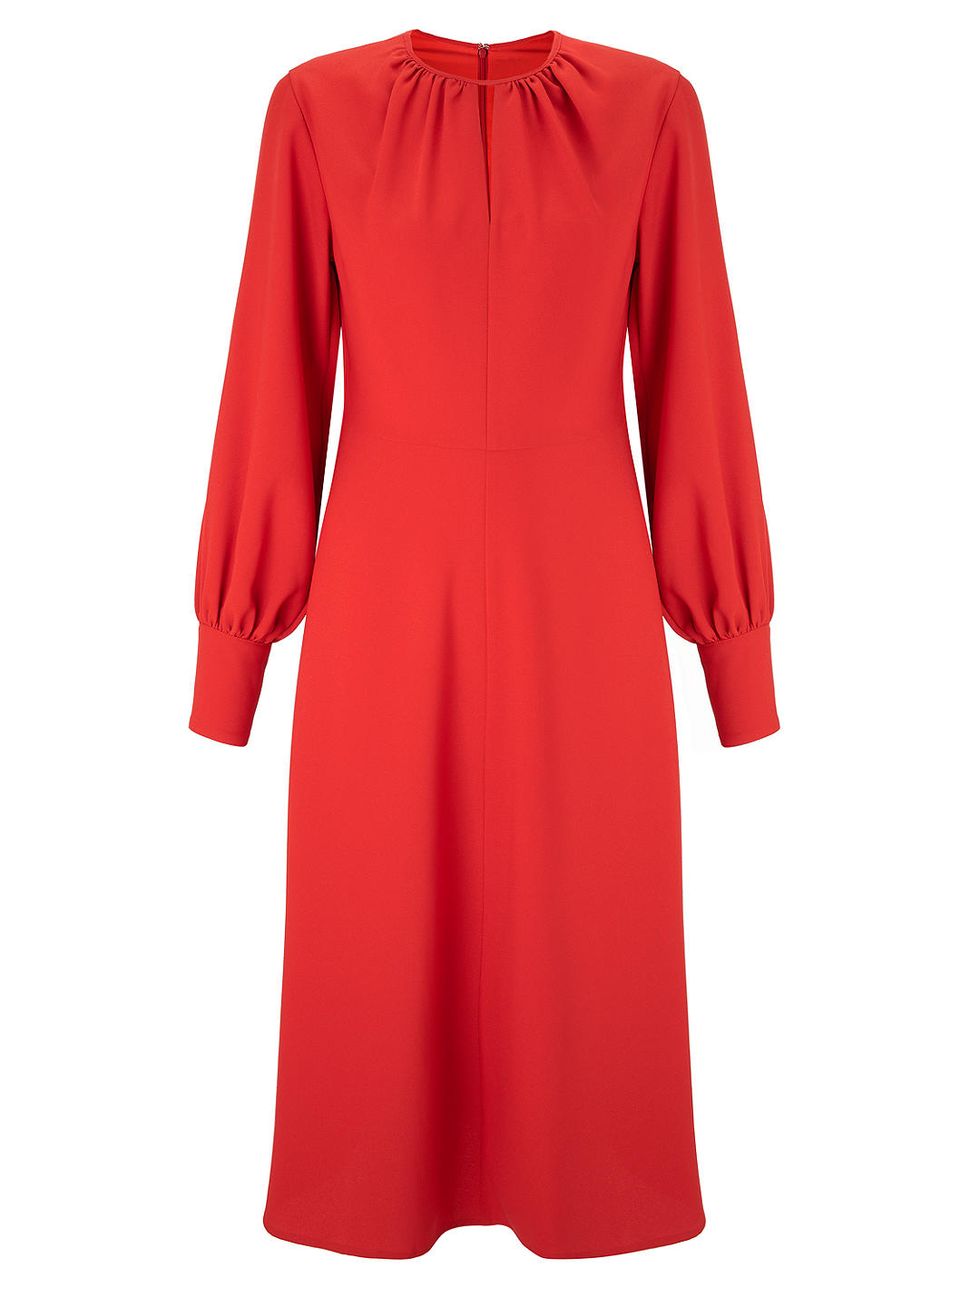 Clothing, Dress, Red, Day dress, Sleeve, Orange, Neck, Cocktail dress, Outerwear, A-line, 